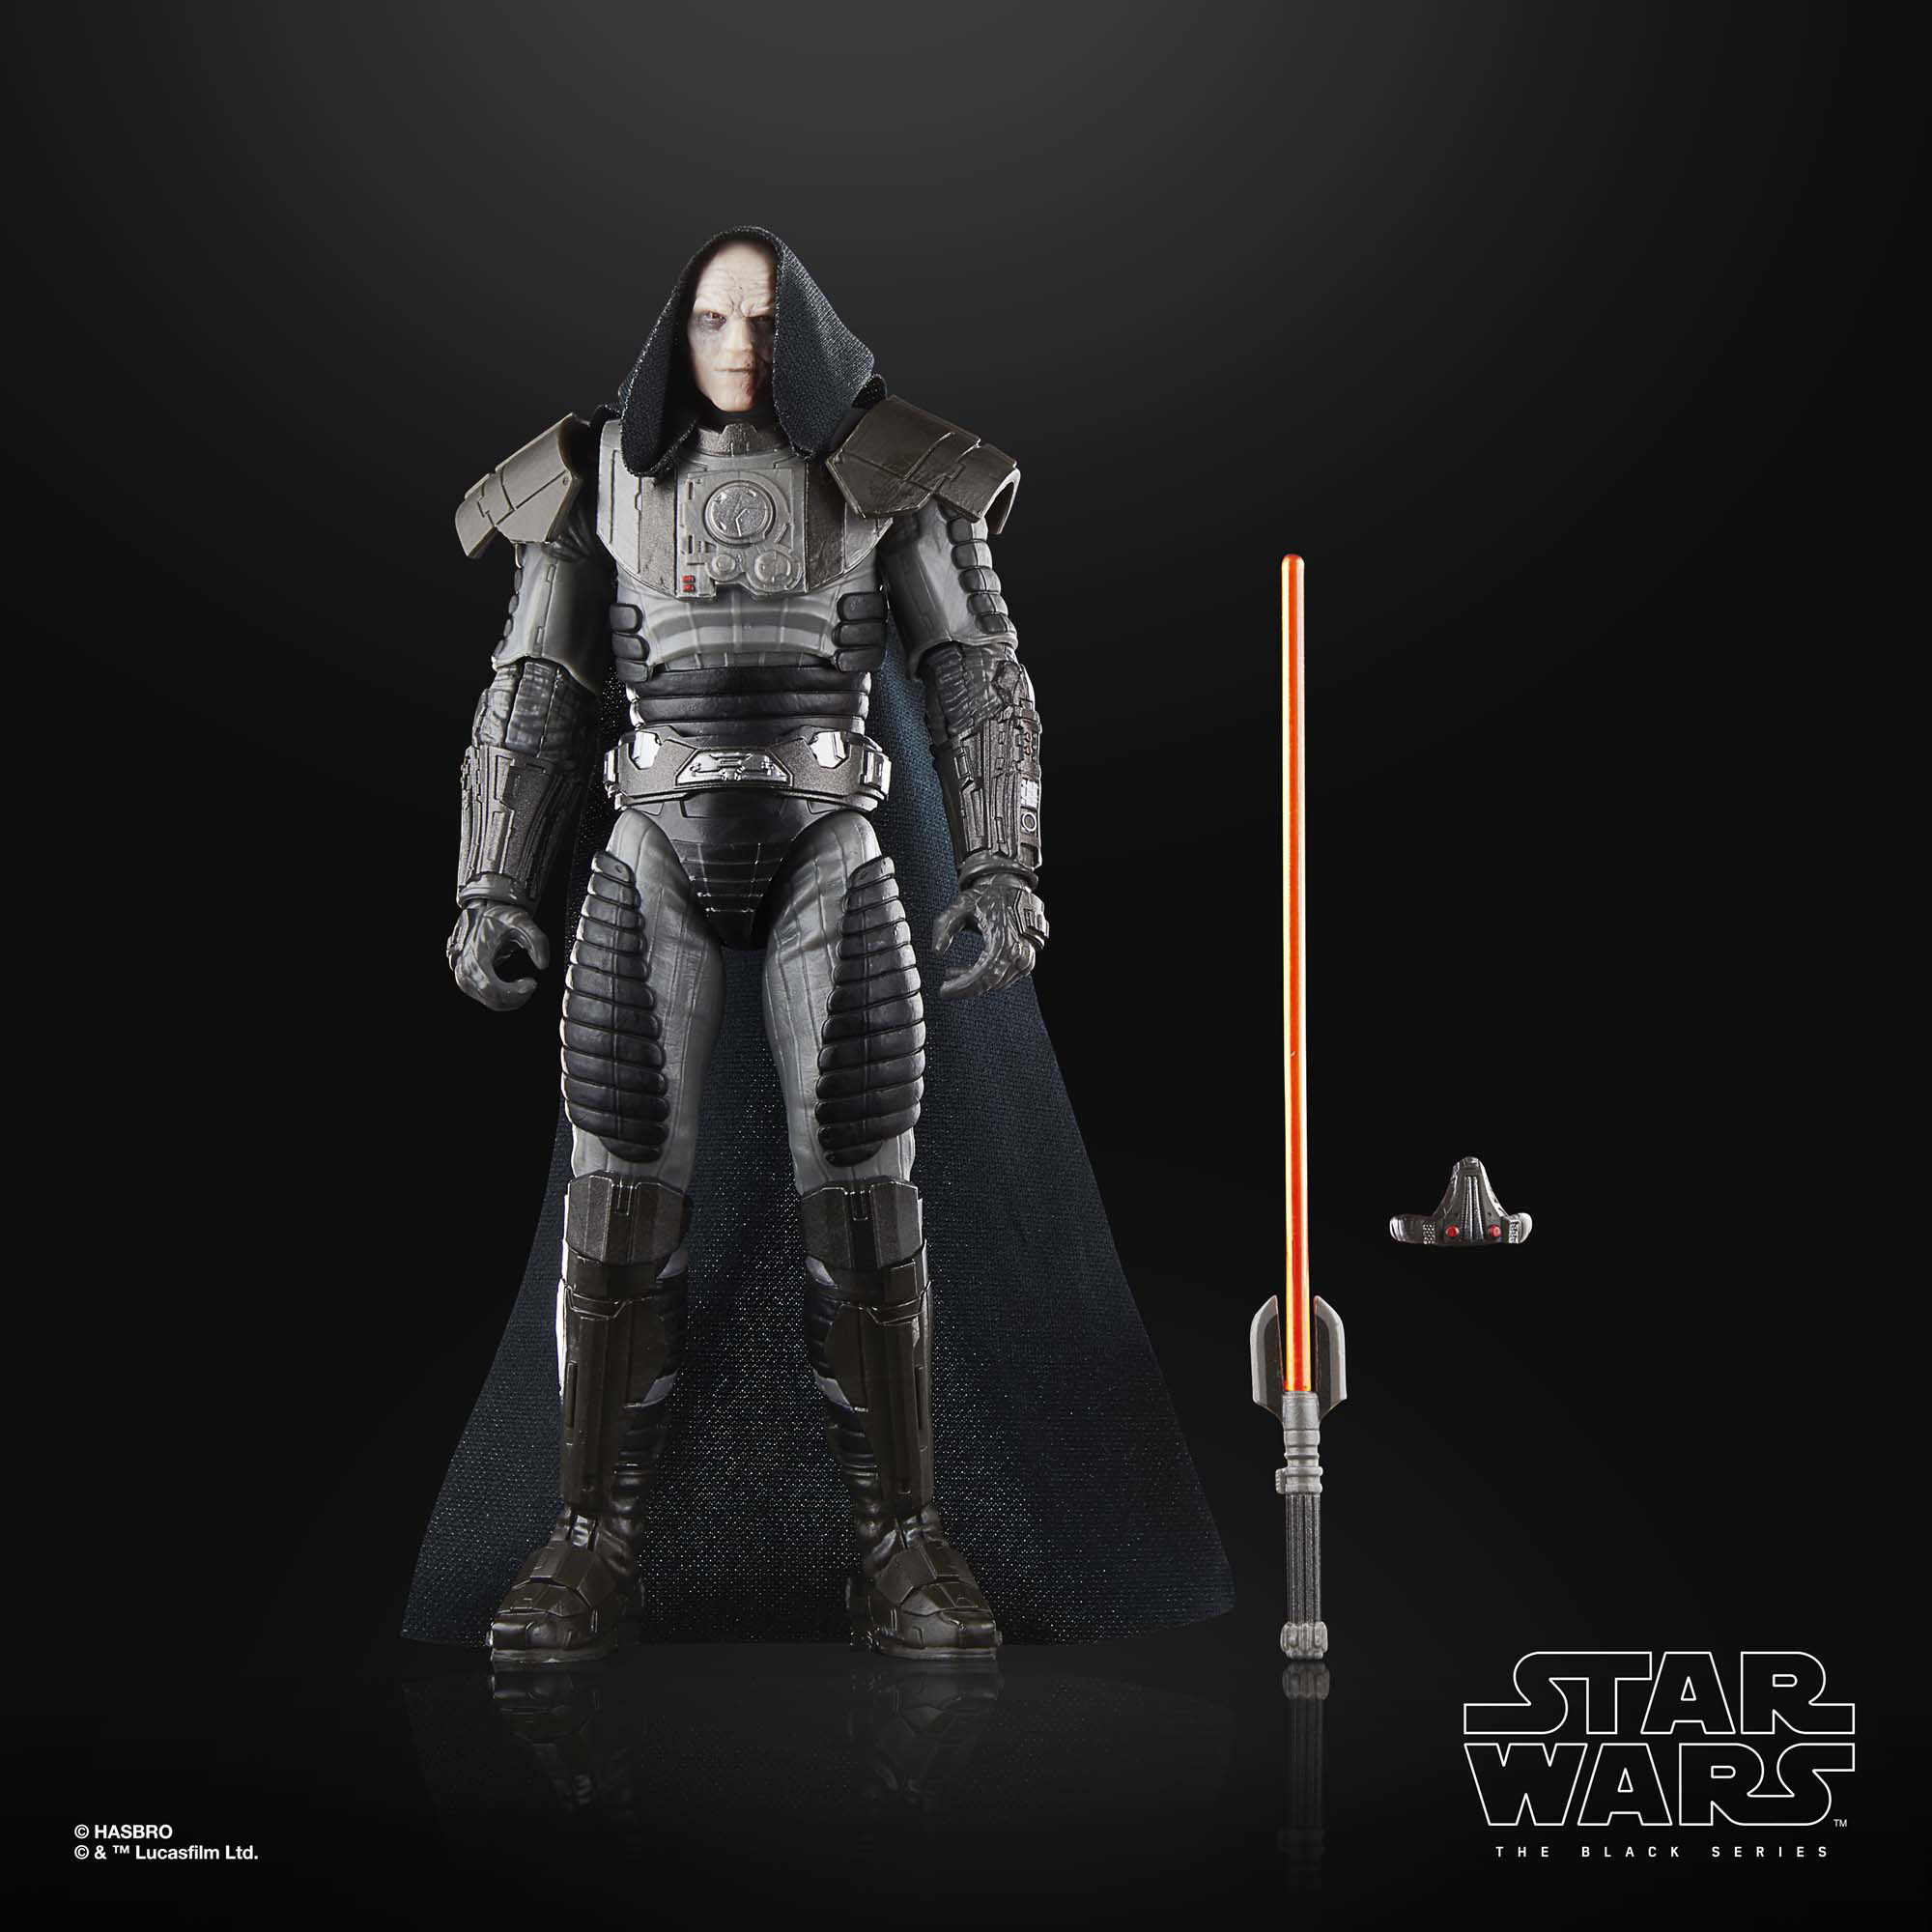 Press Release 5/3/23 - New The Black Series 6-Inch Deluxe Gaming Greats Reveals